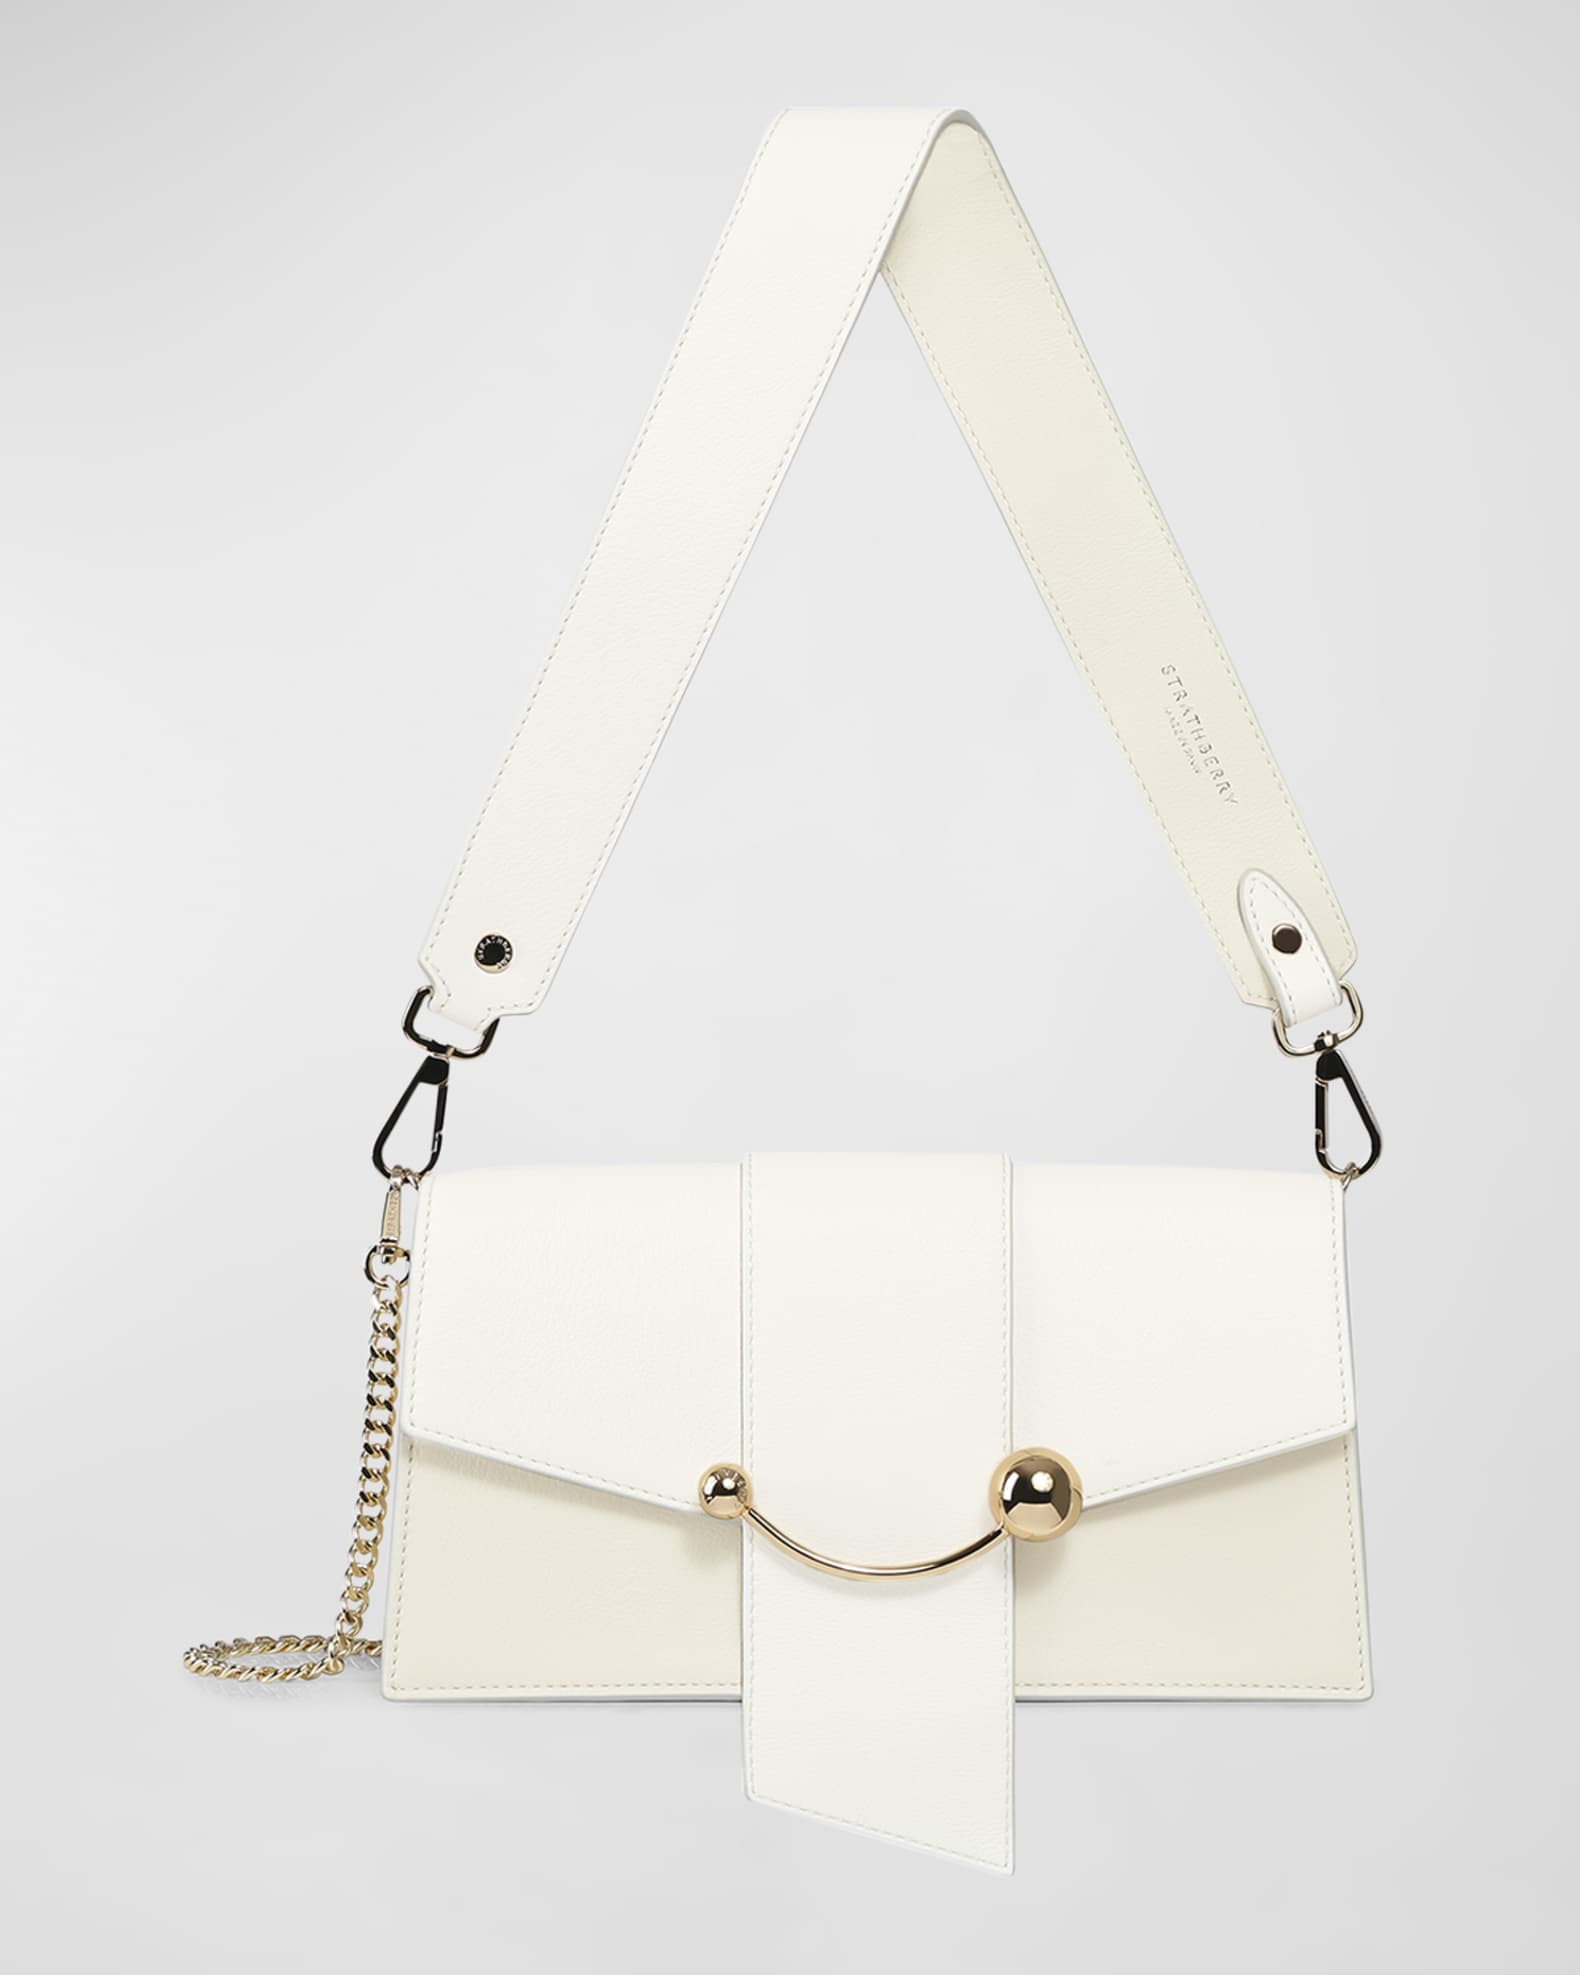 Strathberry Mini Crescent Leather Bag